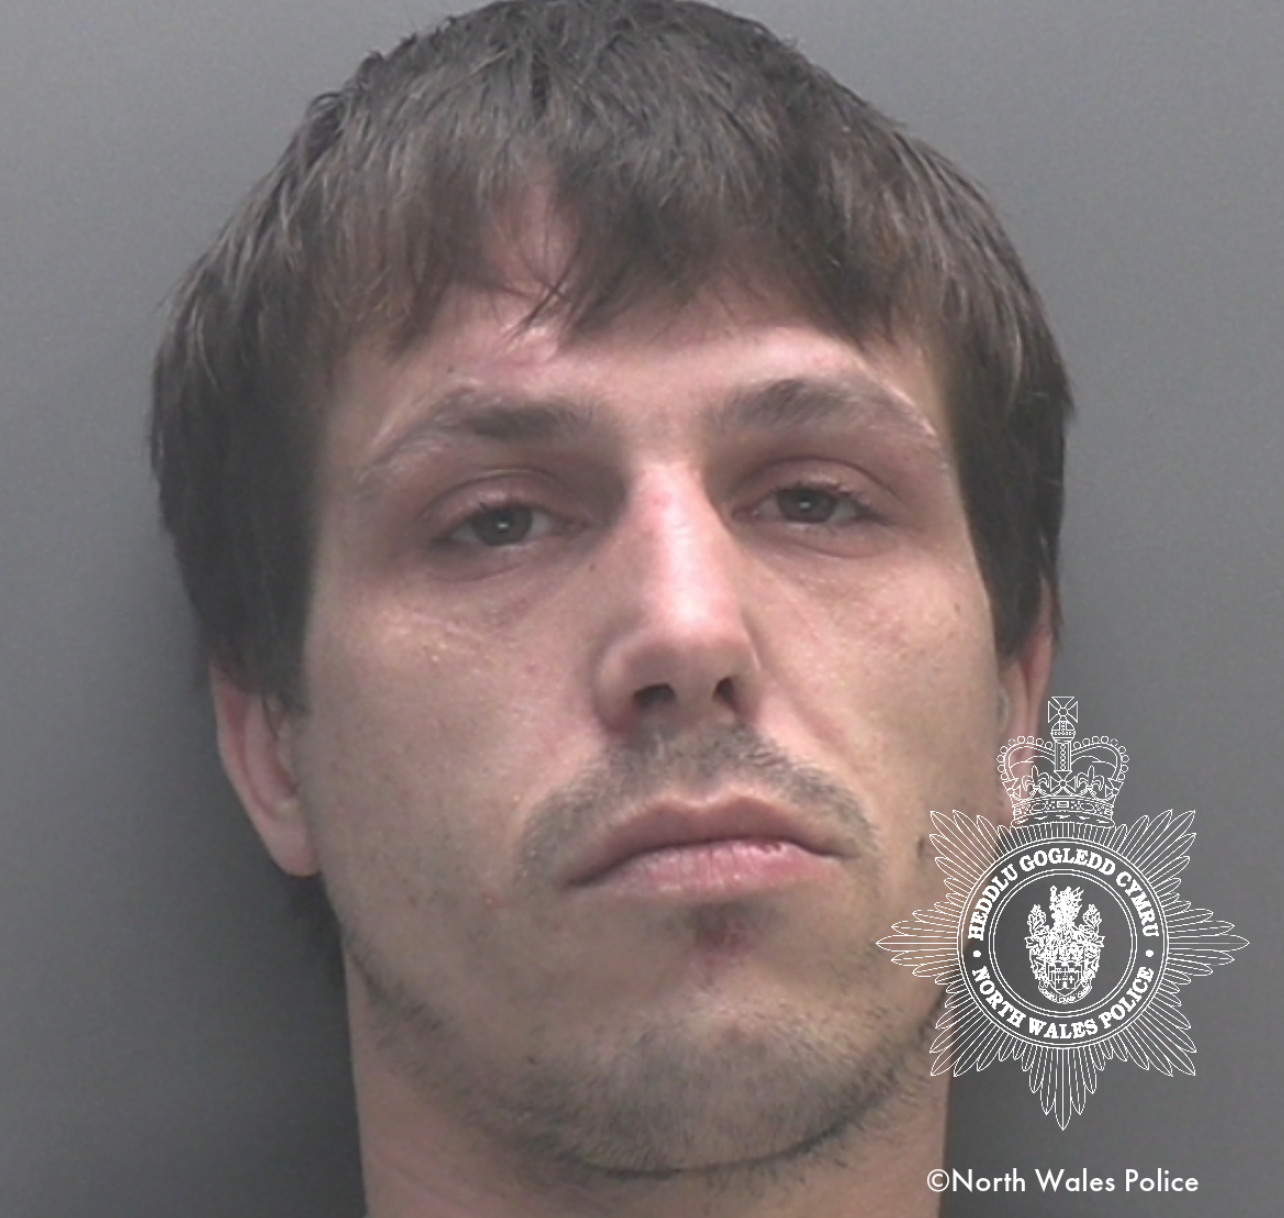 31-year-old man jailed for sexual offences